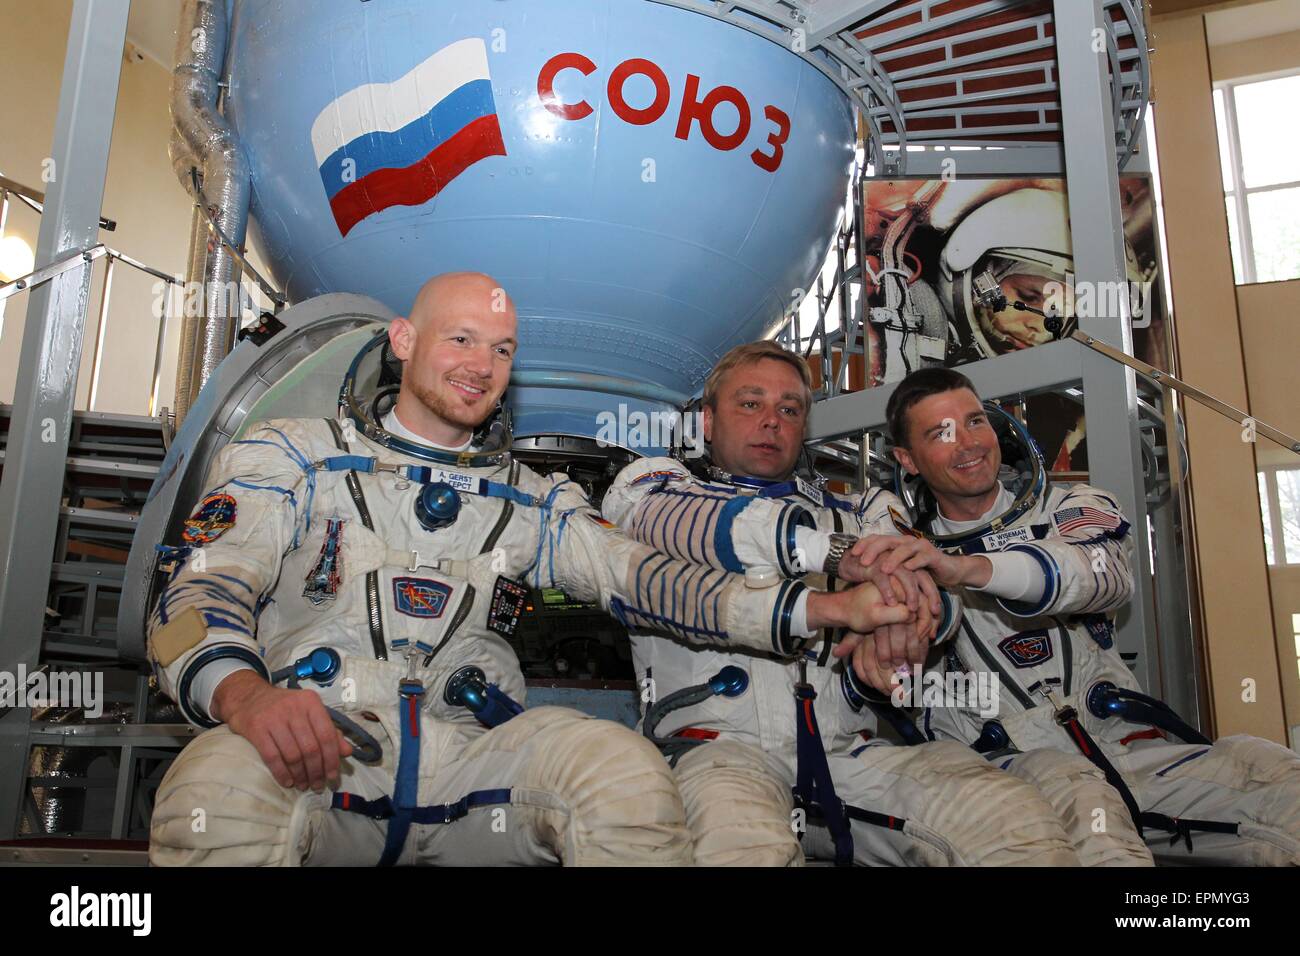 International Space Station Expedition 40 crew members ESA astronaut Alexander Gerst, left, Soyuz commander Max Suraev, center, and NASA astronaut Reid Wiseman pose in front of a Soyuz simulator at the Gagarin Cosmonaut Training Center May 6, 2015 in Star City, Russia. Stock Photo